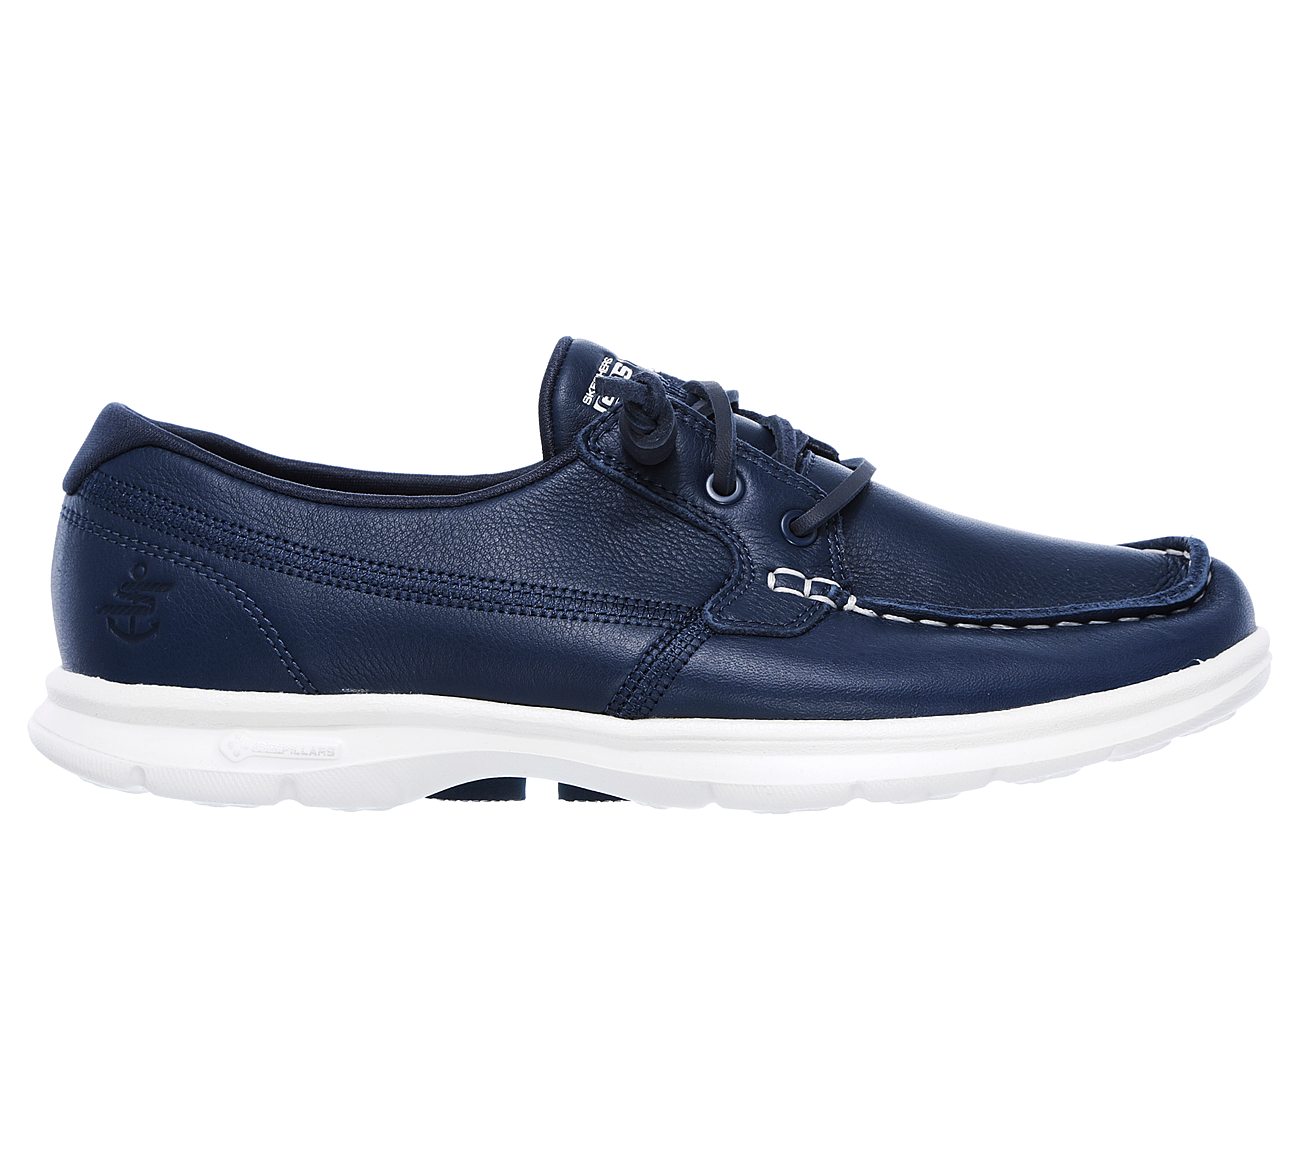 skechers go step boat shoes